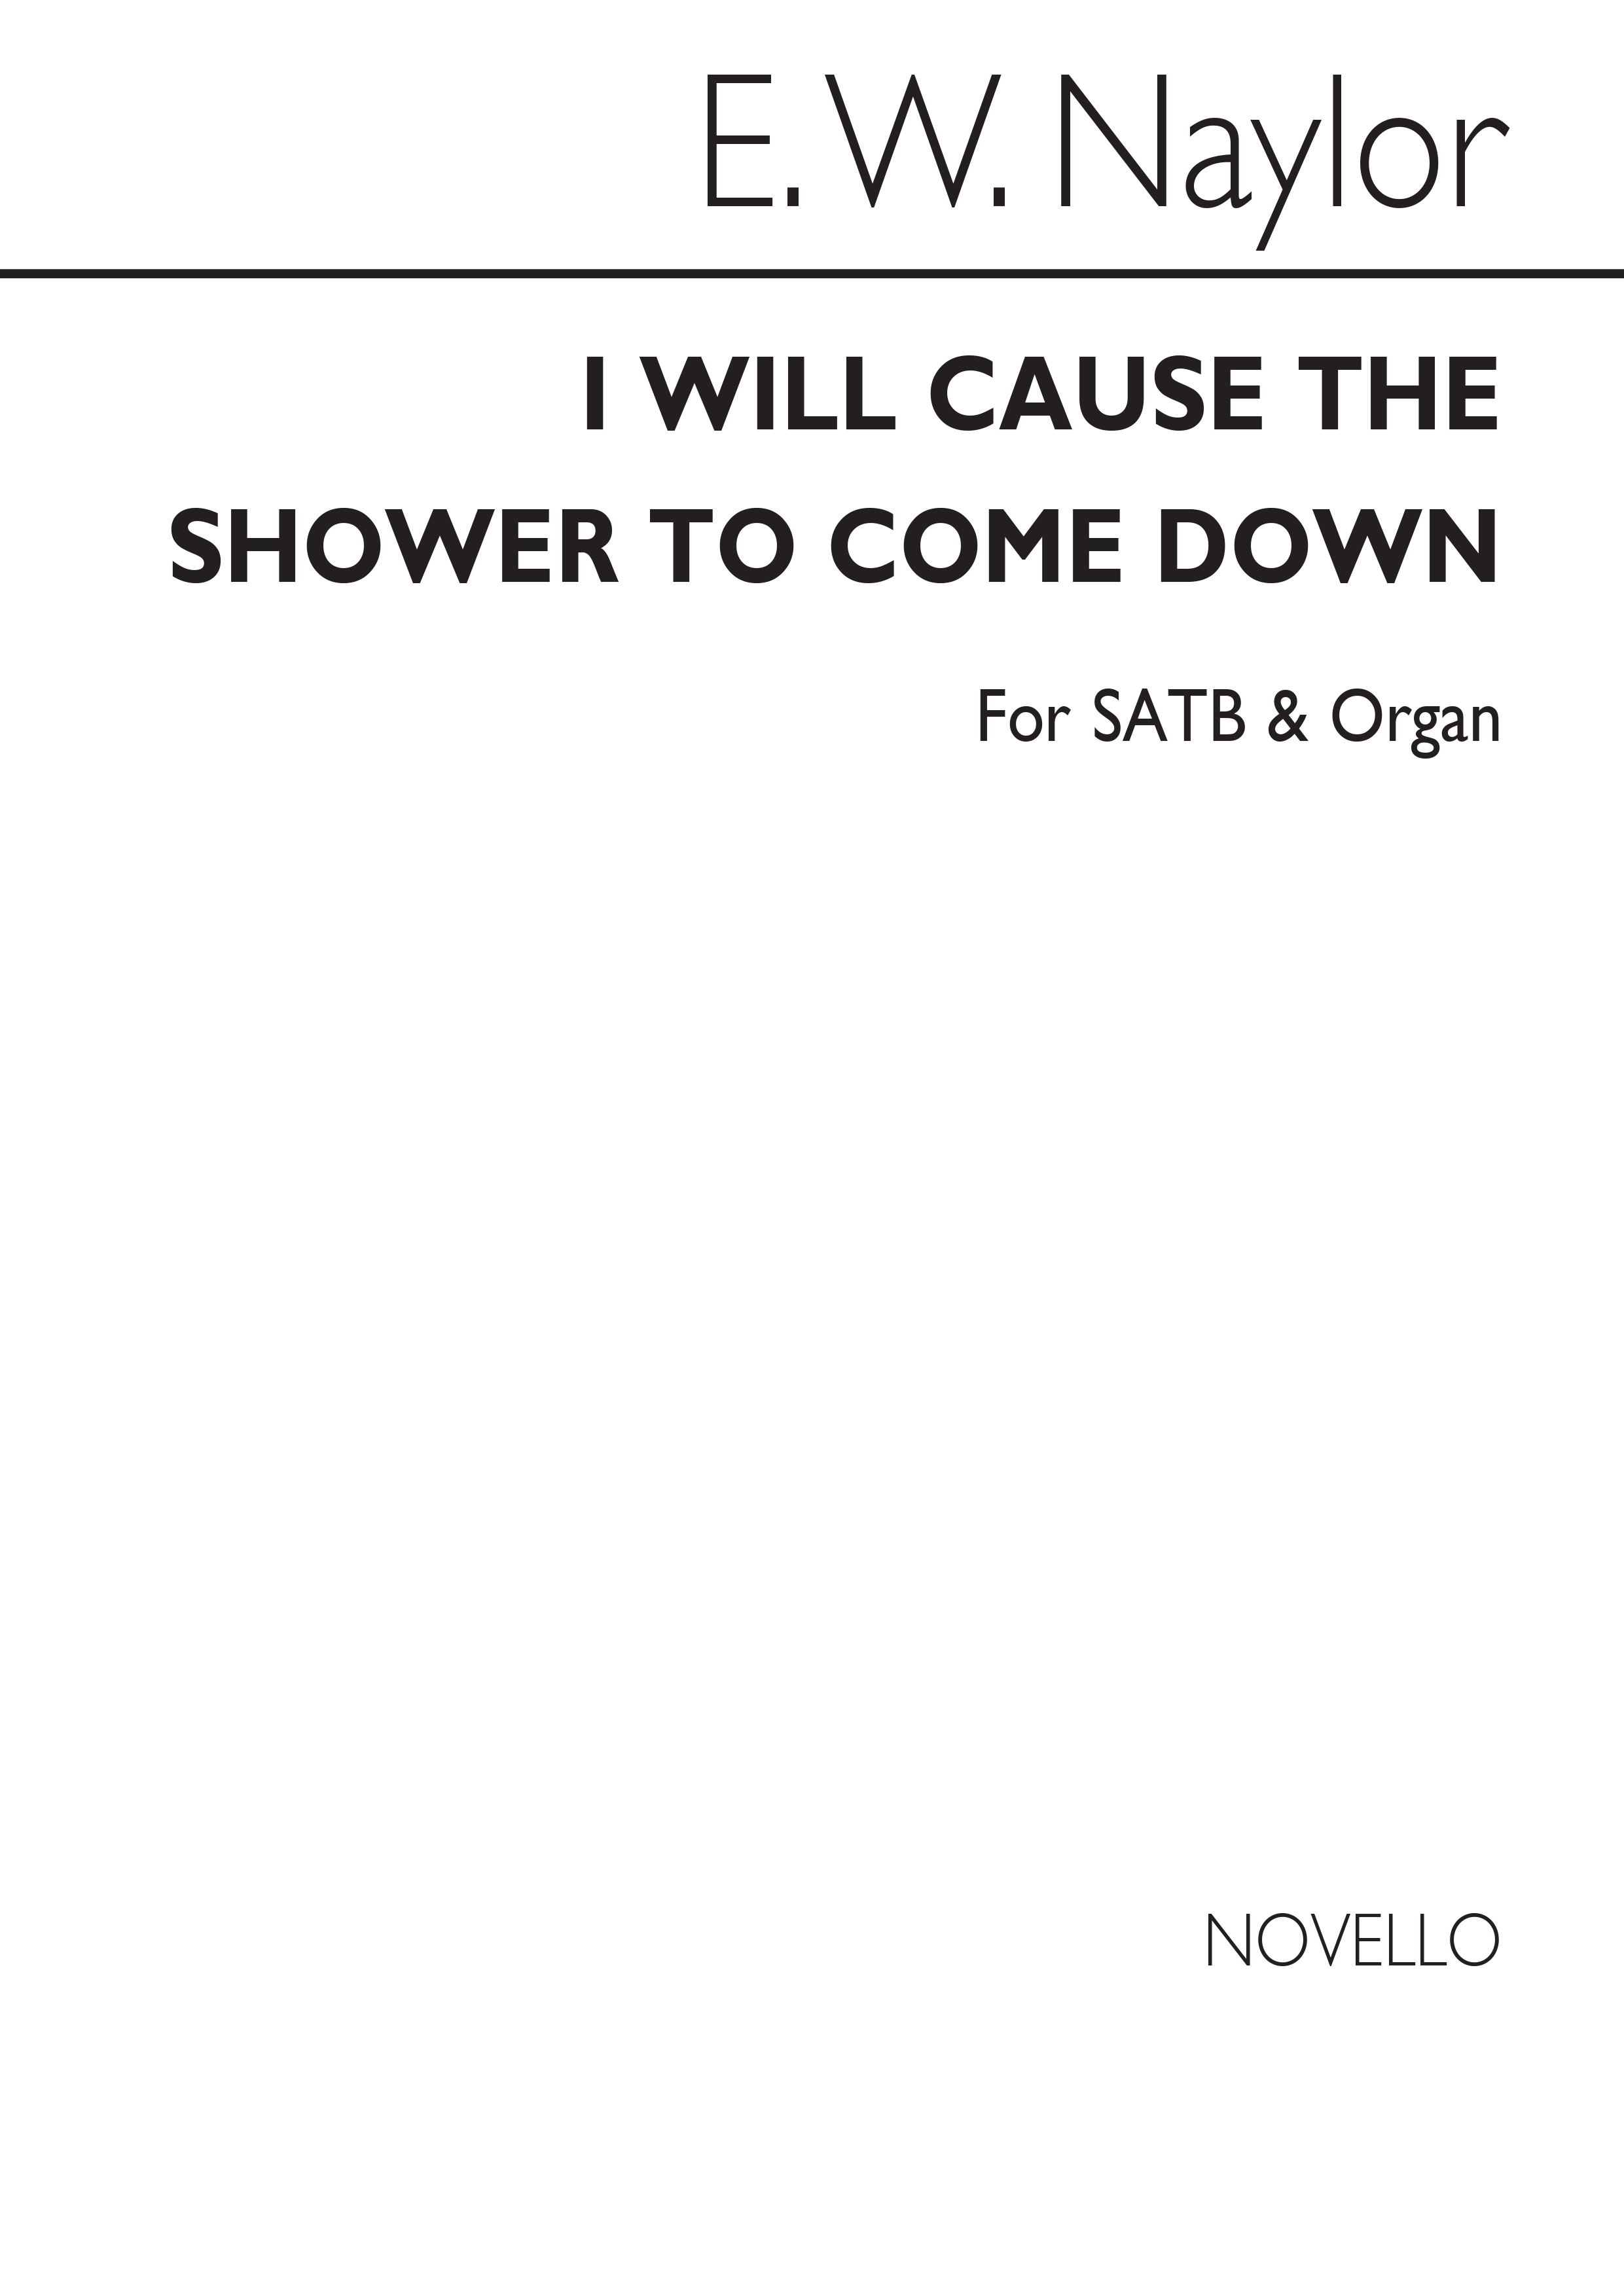 Edward W. Naylor: I Will Cause The Shower for SATB Chorus with Organ acc.